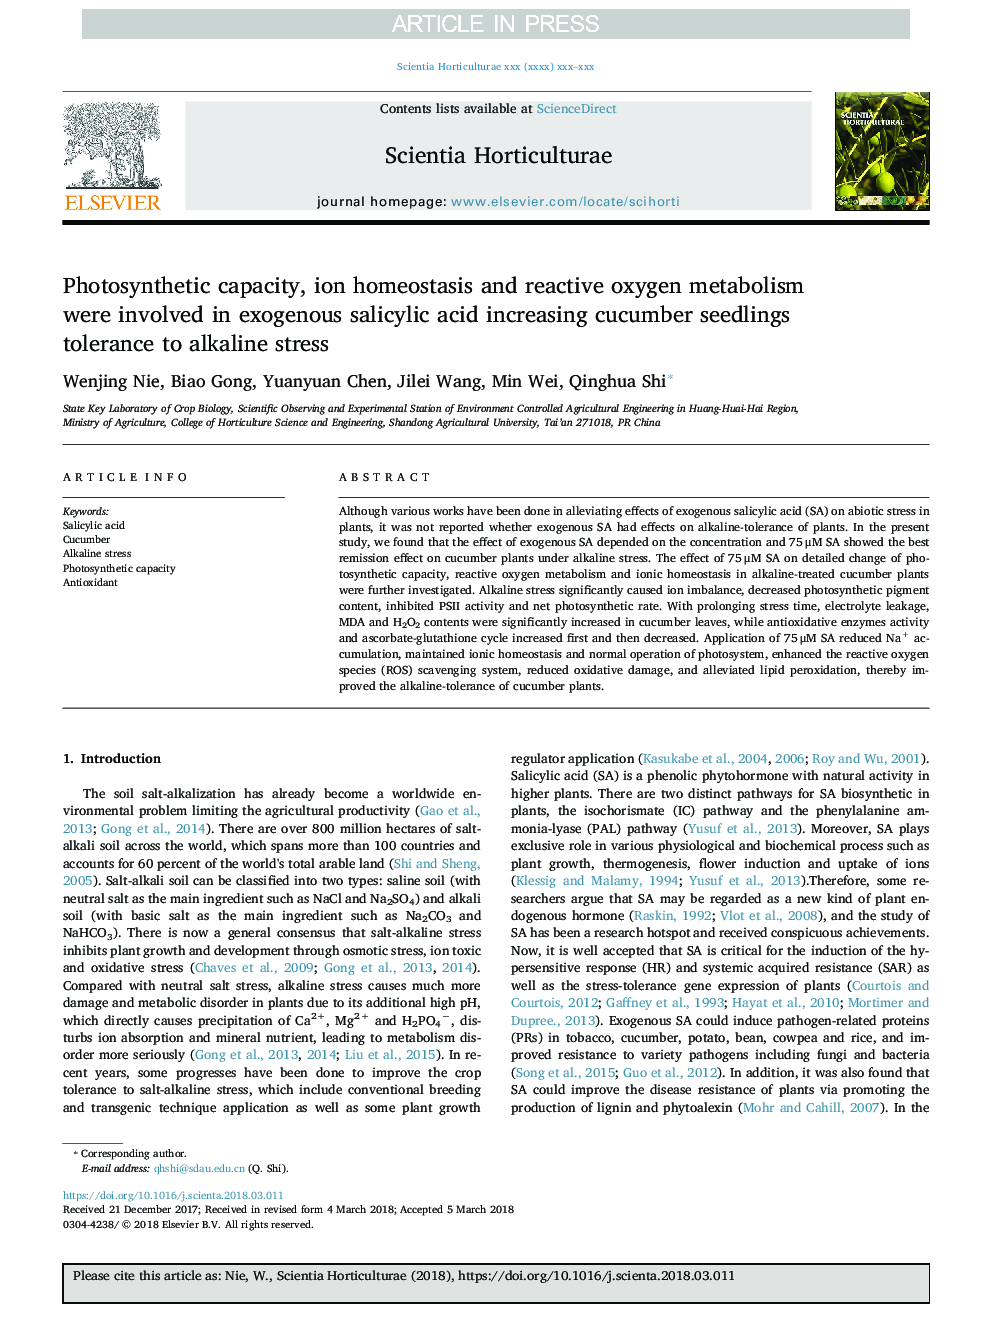 Photosynthetic capacity, ion homeostasis and reactive oxygen metabolism were involved in exogenous salicylic acid increasing cucumber seedlings tolerance to alkaline stress